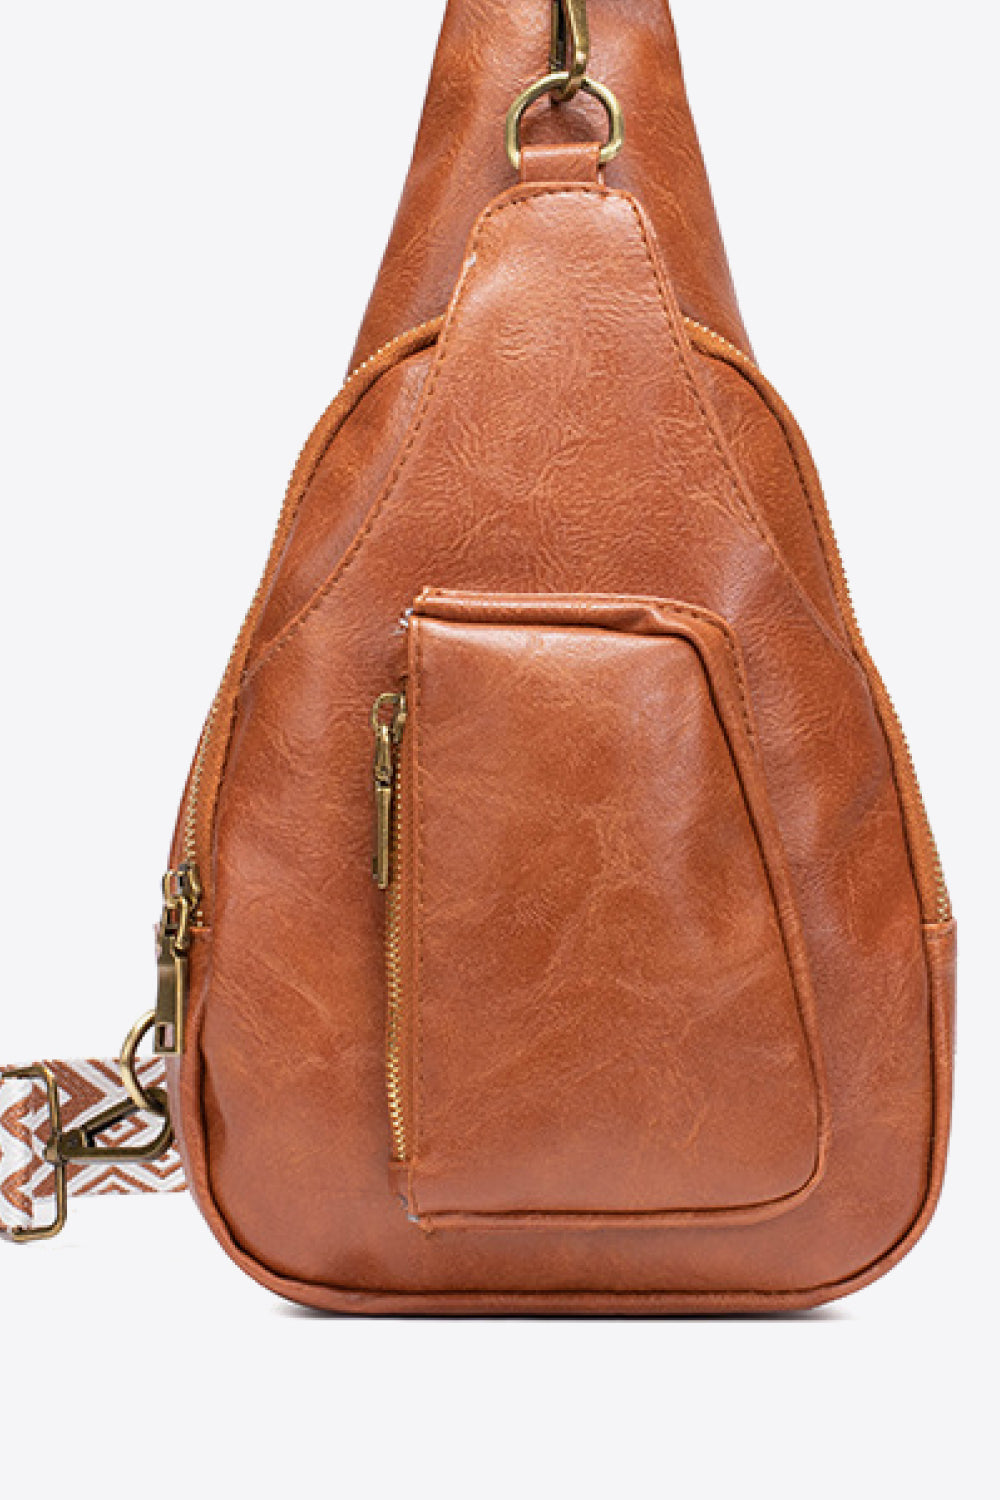 All The Feels Vegan Leather Crossbody Sling Bag Accessories Southern Soul Collectives 